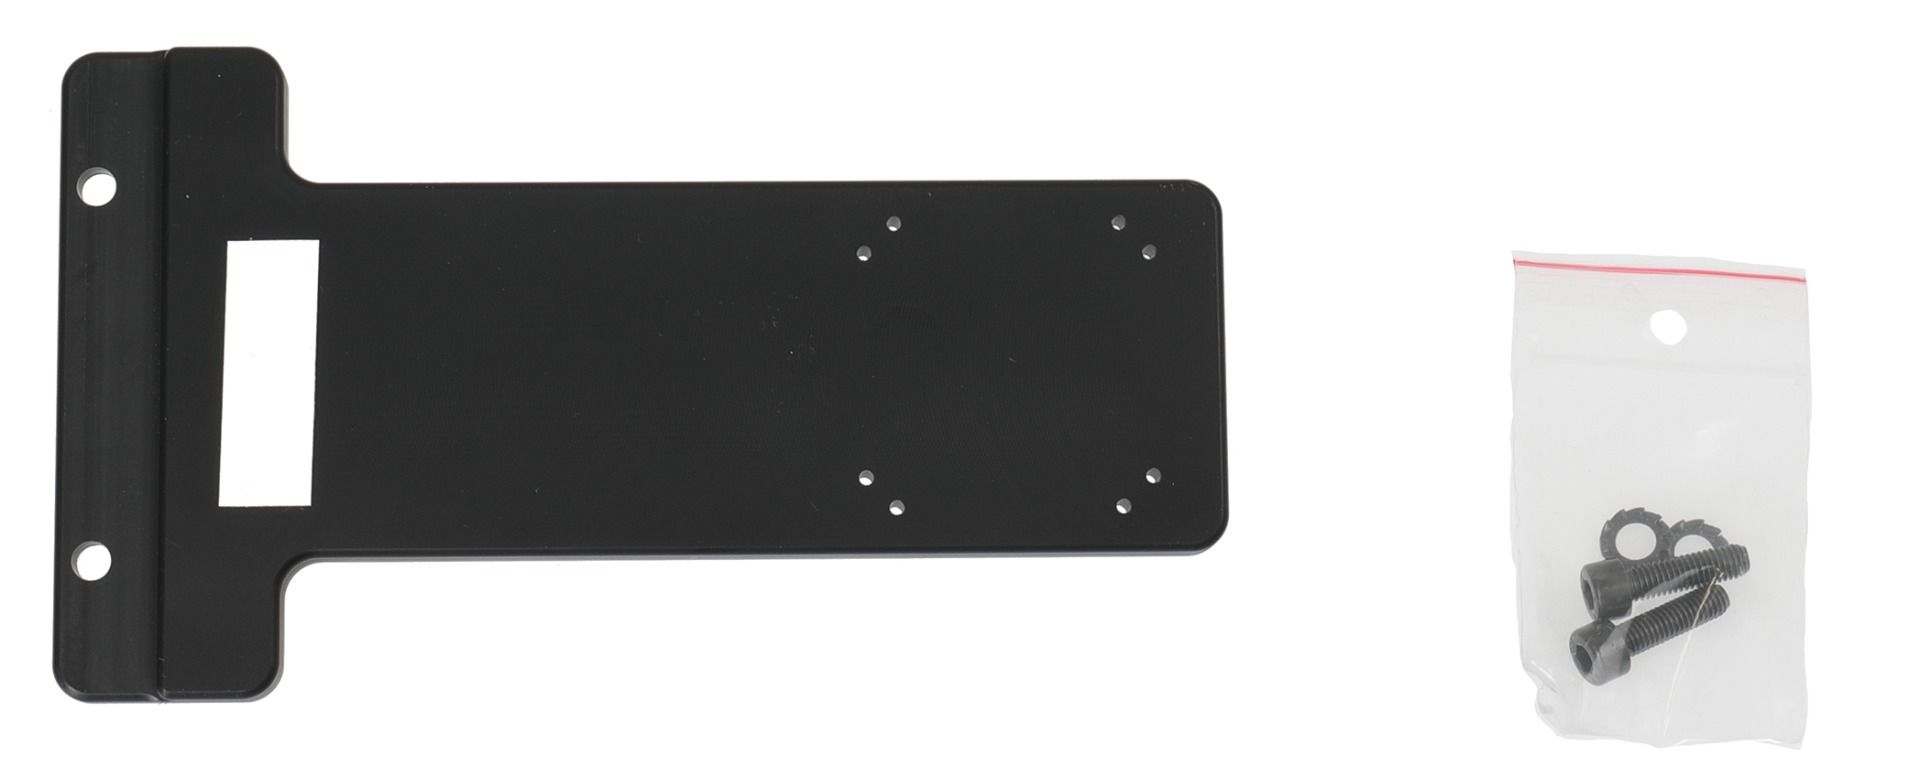 Brodit MUC extension plate for Module Upgrade Cradles 10"